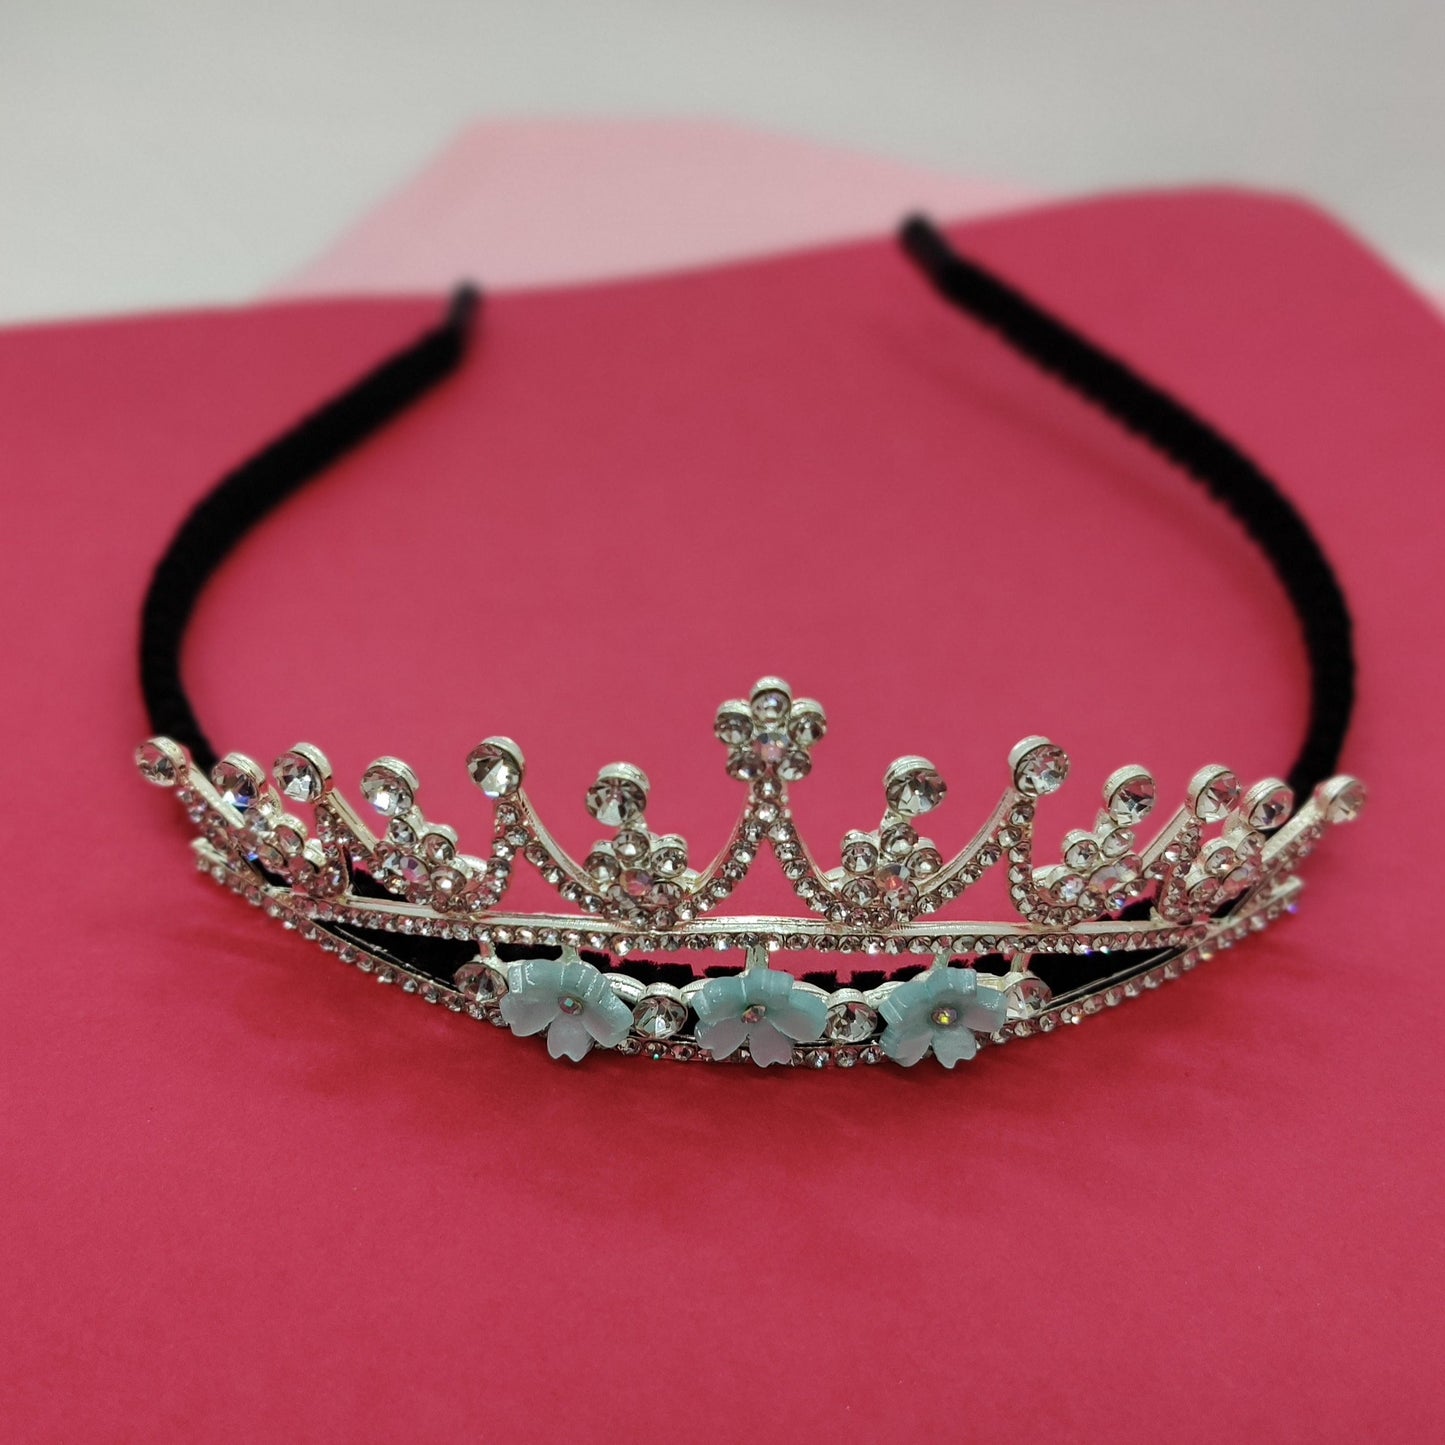 BEADED CROWN APPLIQUE HAIRBAND